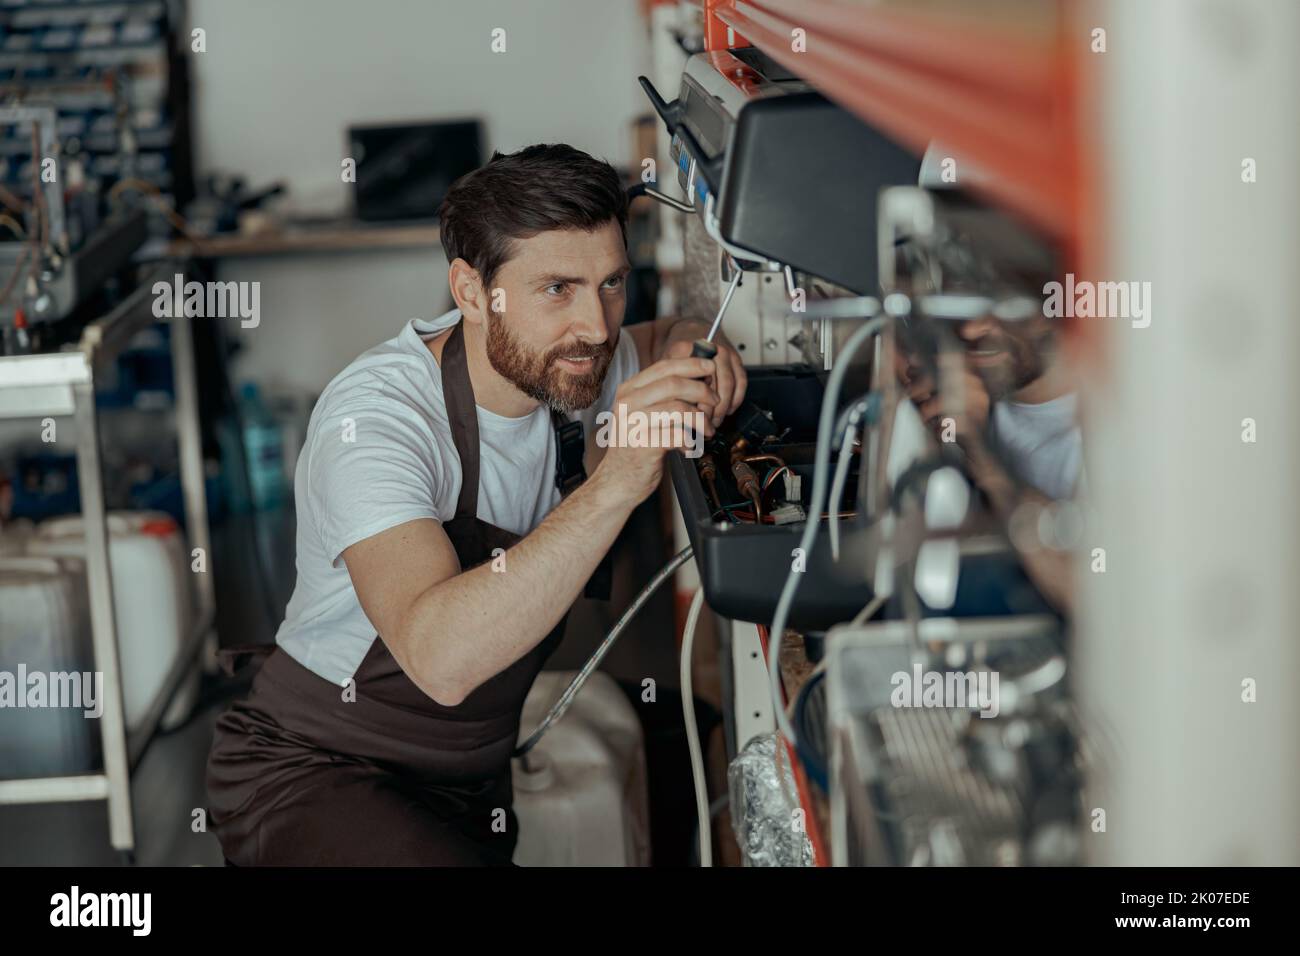 Smiling young man repairing coffee machine using screwdriver in a workshop Stock Photo